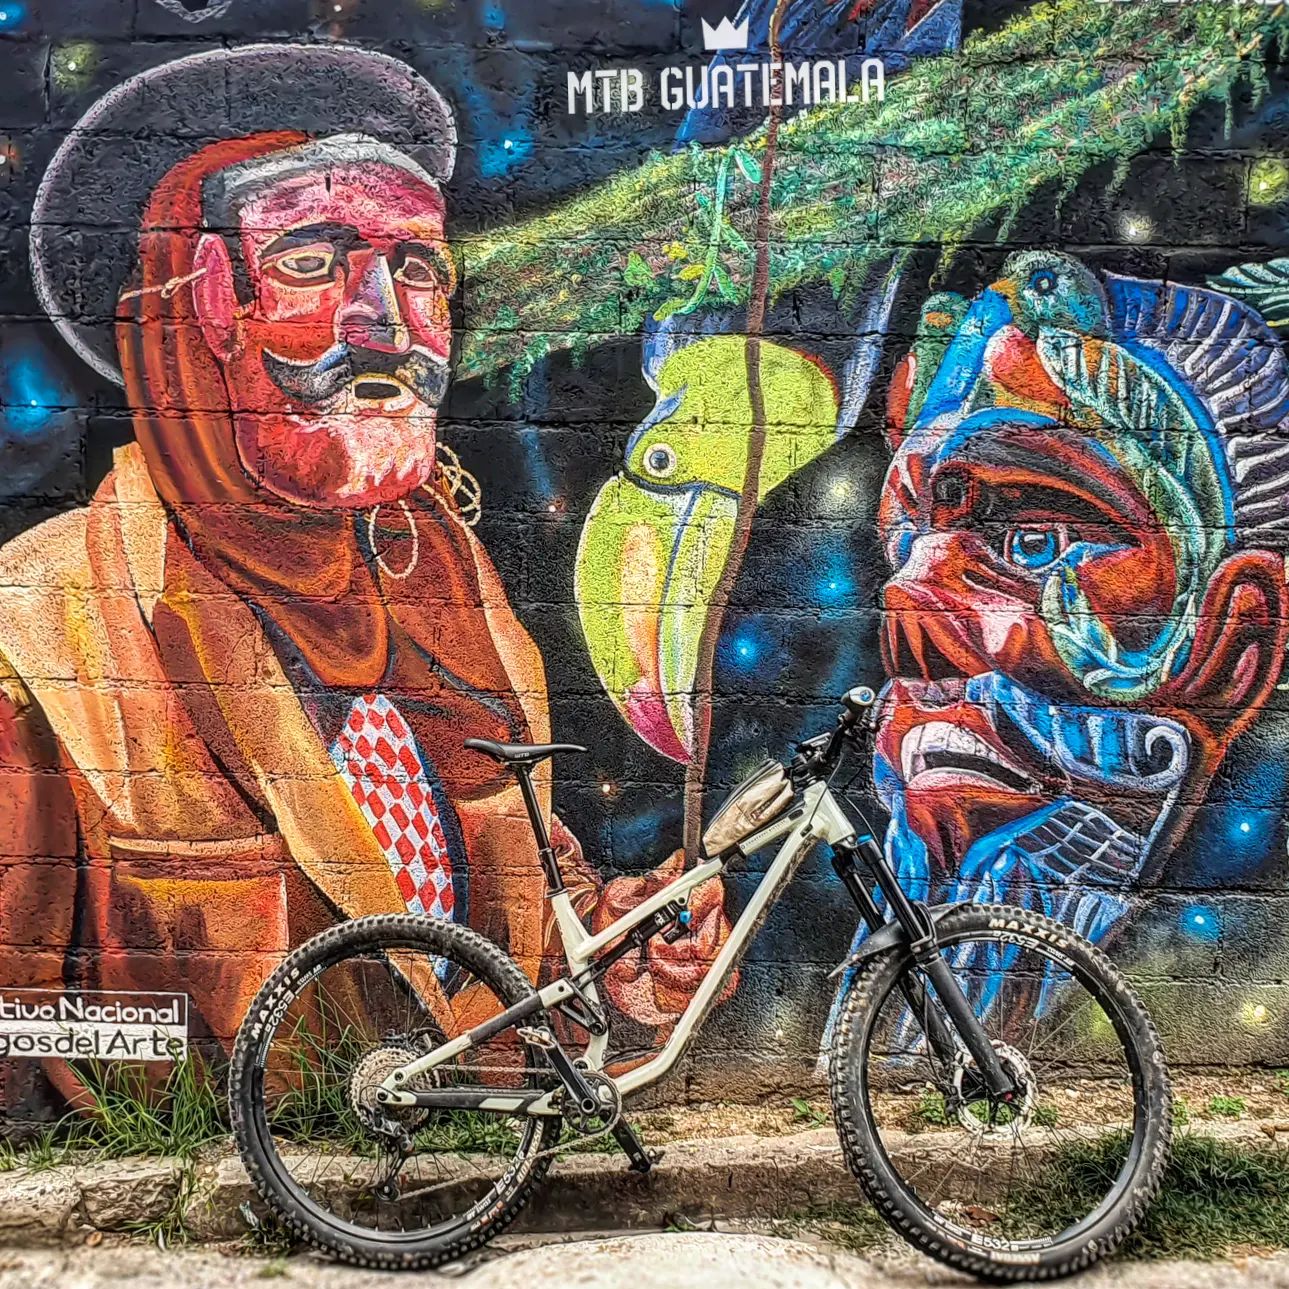 Maximón is revered by the Maya throughout the Guatemalan highlands👹San Simon is the unrecognized Spanish saint, and Maximon is the Mayan shaman. Maximón is said to represent both light and dark, and to be a trickster. He is both a womanizer and a protector of couples..#mayan #visitguatemala #mtbtravel #biketours #mtblife #mtbguide #mtbguatemala #mountainbikeguatemala #guatemala🇬🇹 #travelguatemala #centralamerica #gorideyourbike #mural #guate